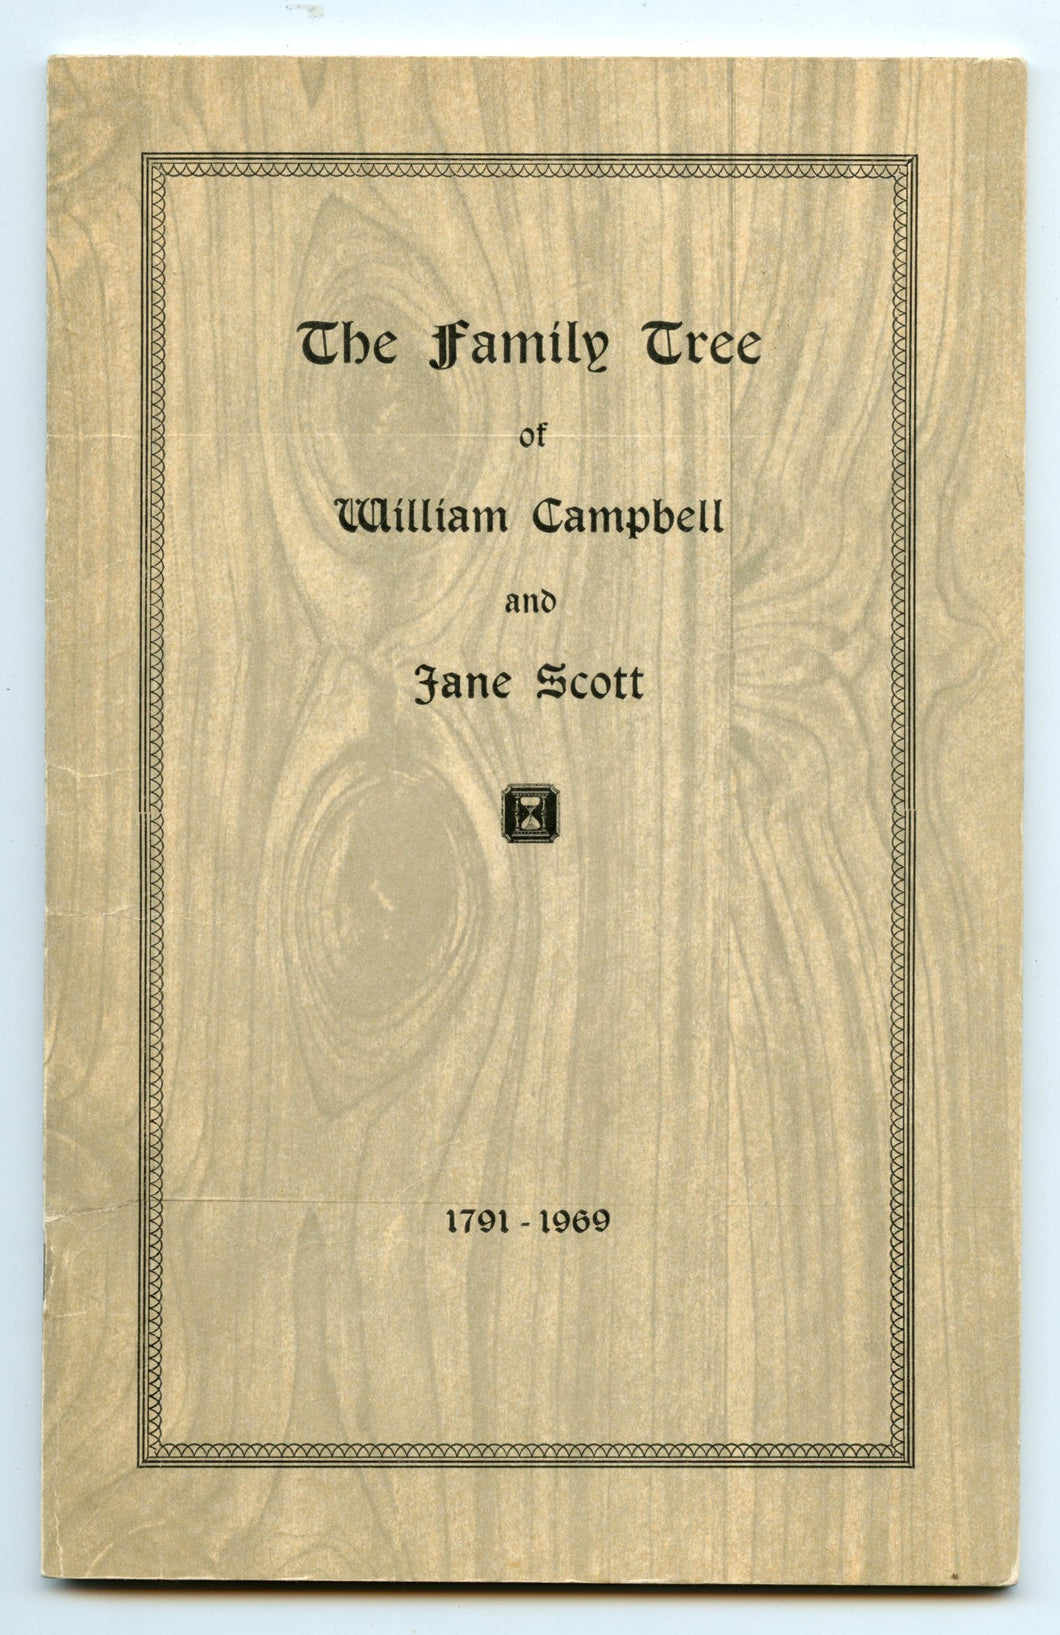 The Family Tree of William Campbell and Jane Scott 1791-1969